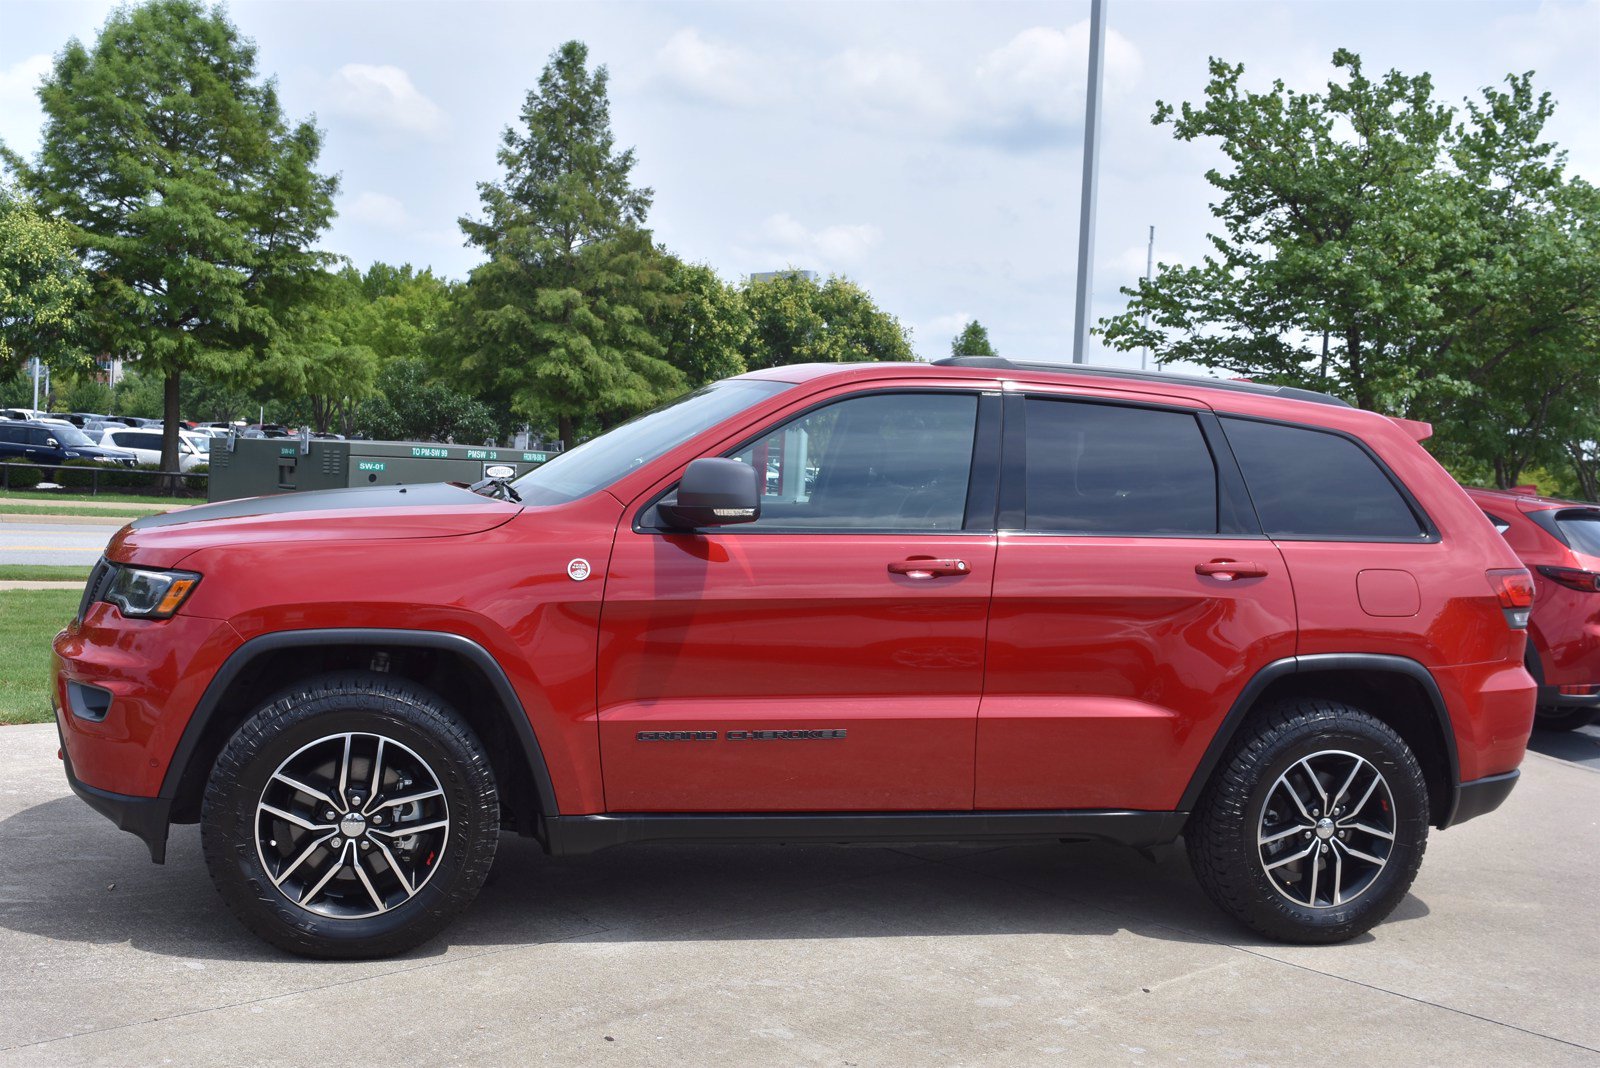 PreOwned 2017 Jeep Grand Cherokee Trailhawk 4WD Sport